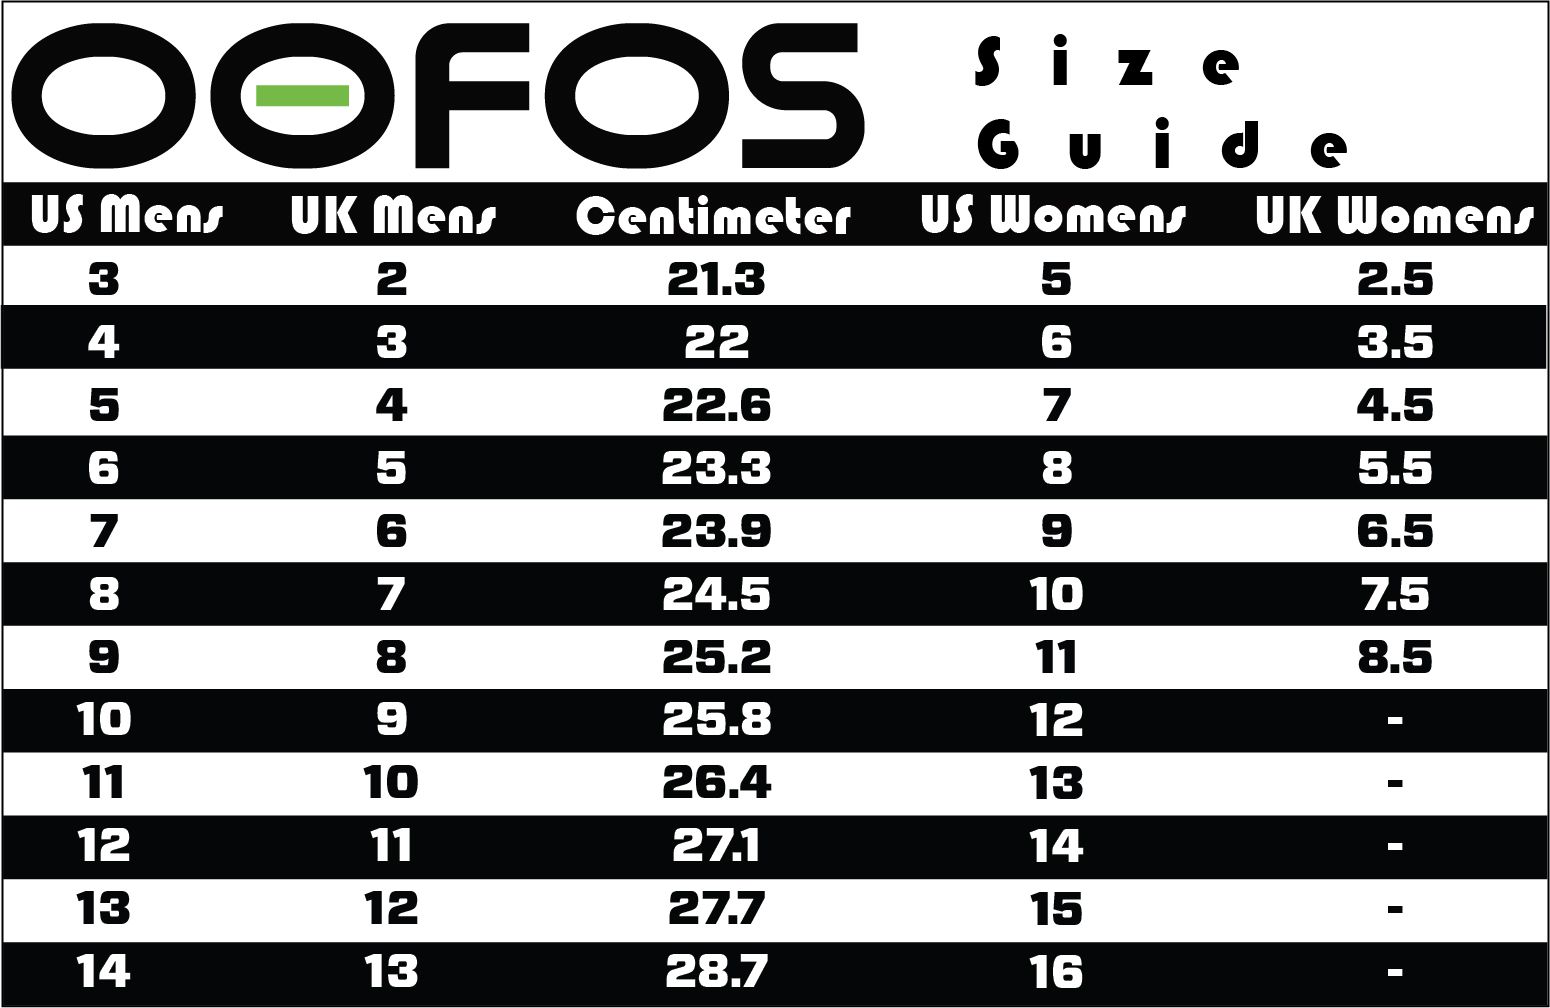 OOFOS Size Guide